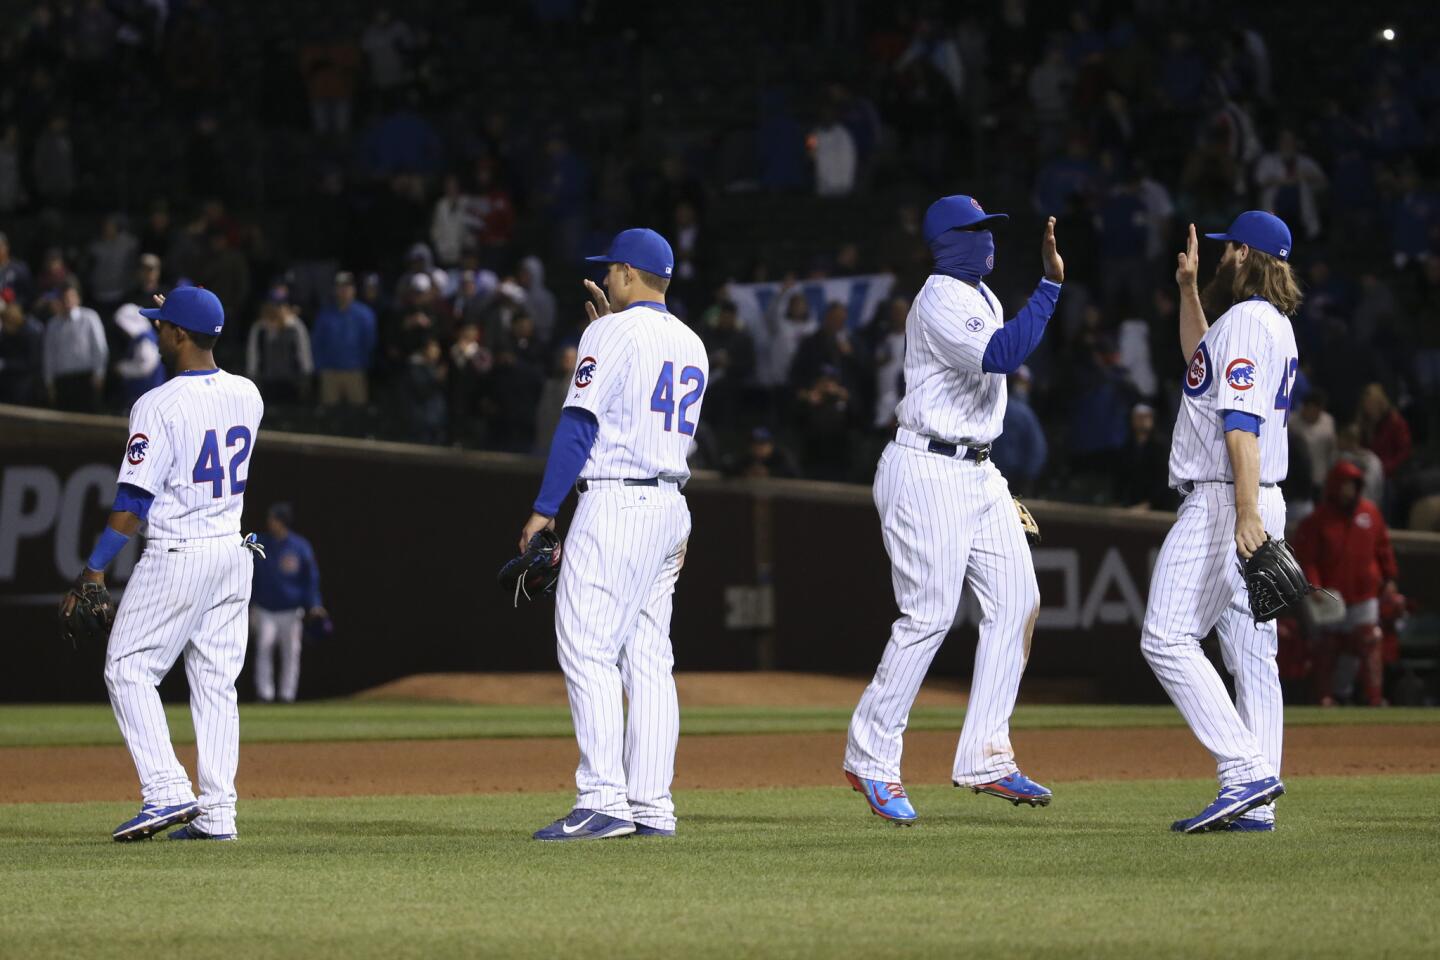 Cubs players celebrate after defeating the Reds 5-0 at Wrigley Field.